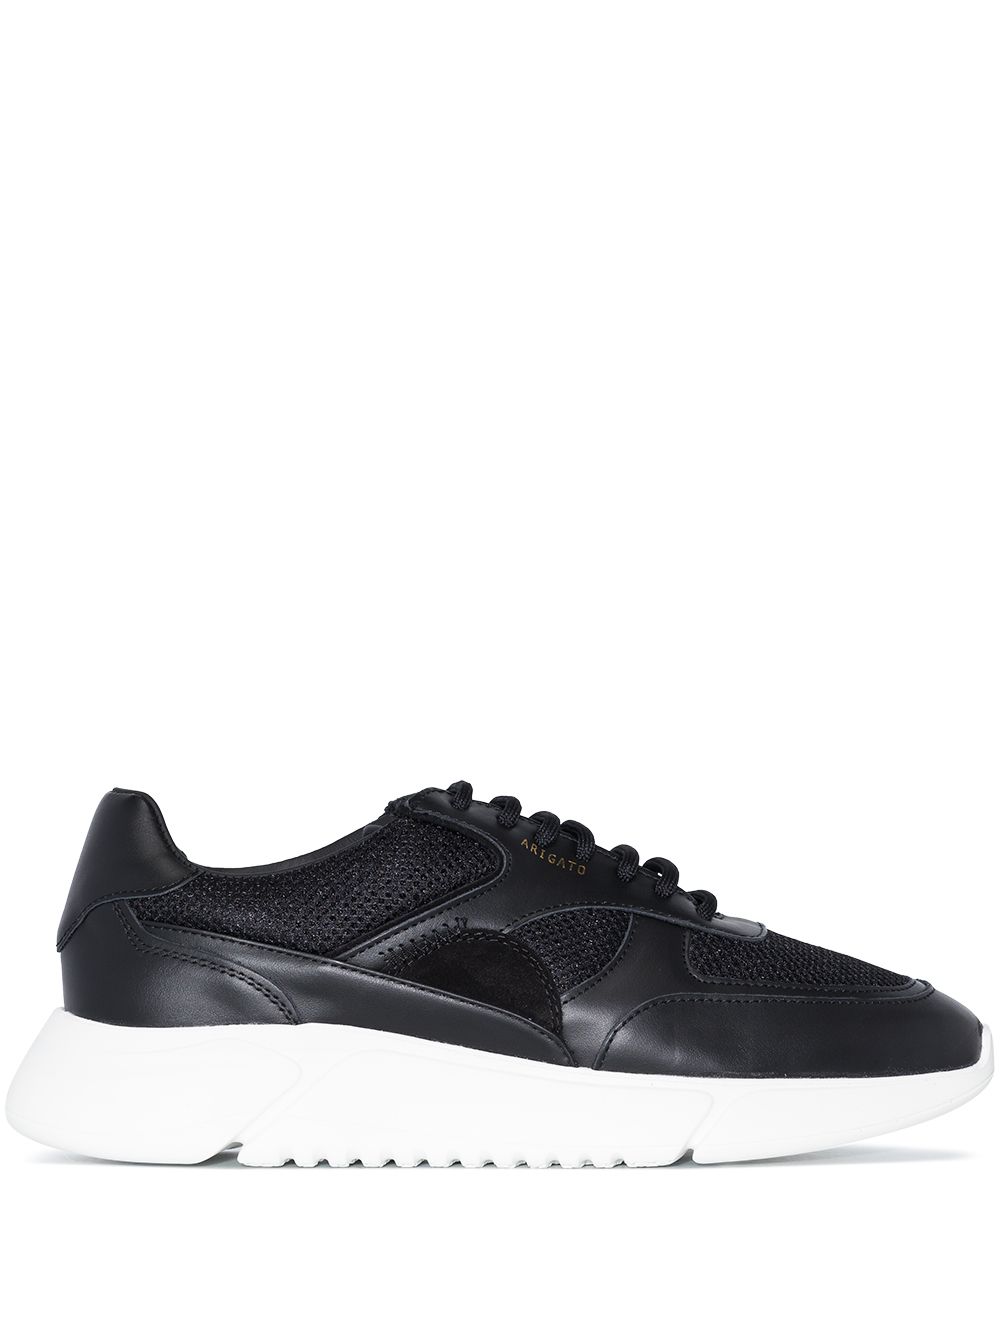 Shop Axel Arigato Genesis low-top sneakers with Express Delivery - FARFETCH